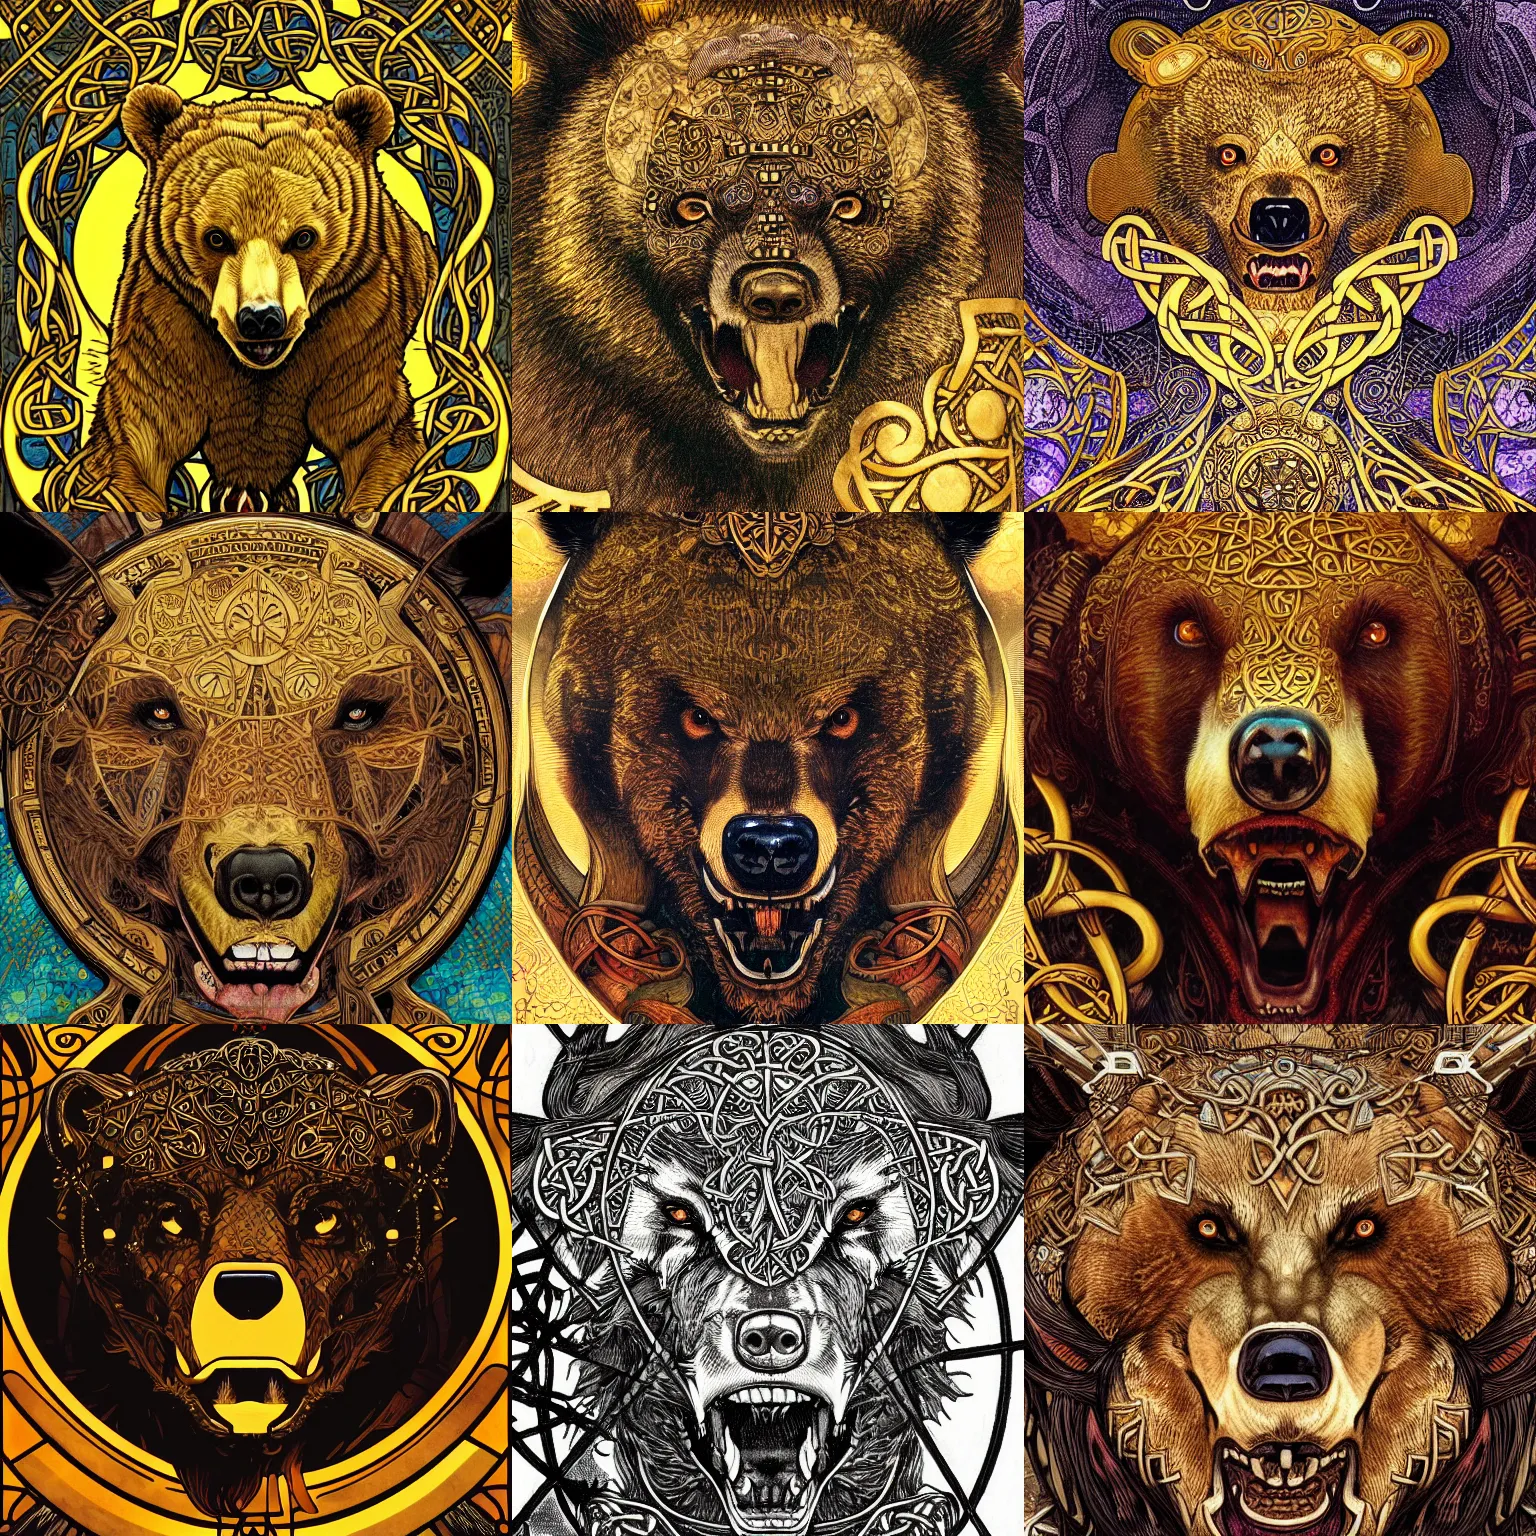 Prompt: portrait close - up of a growling angry bear, symetry, fantasy, intricate, marvel comics, celtic golden symbols, stephanie pui - mun law, alfons mucha